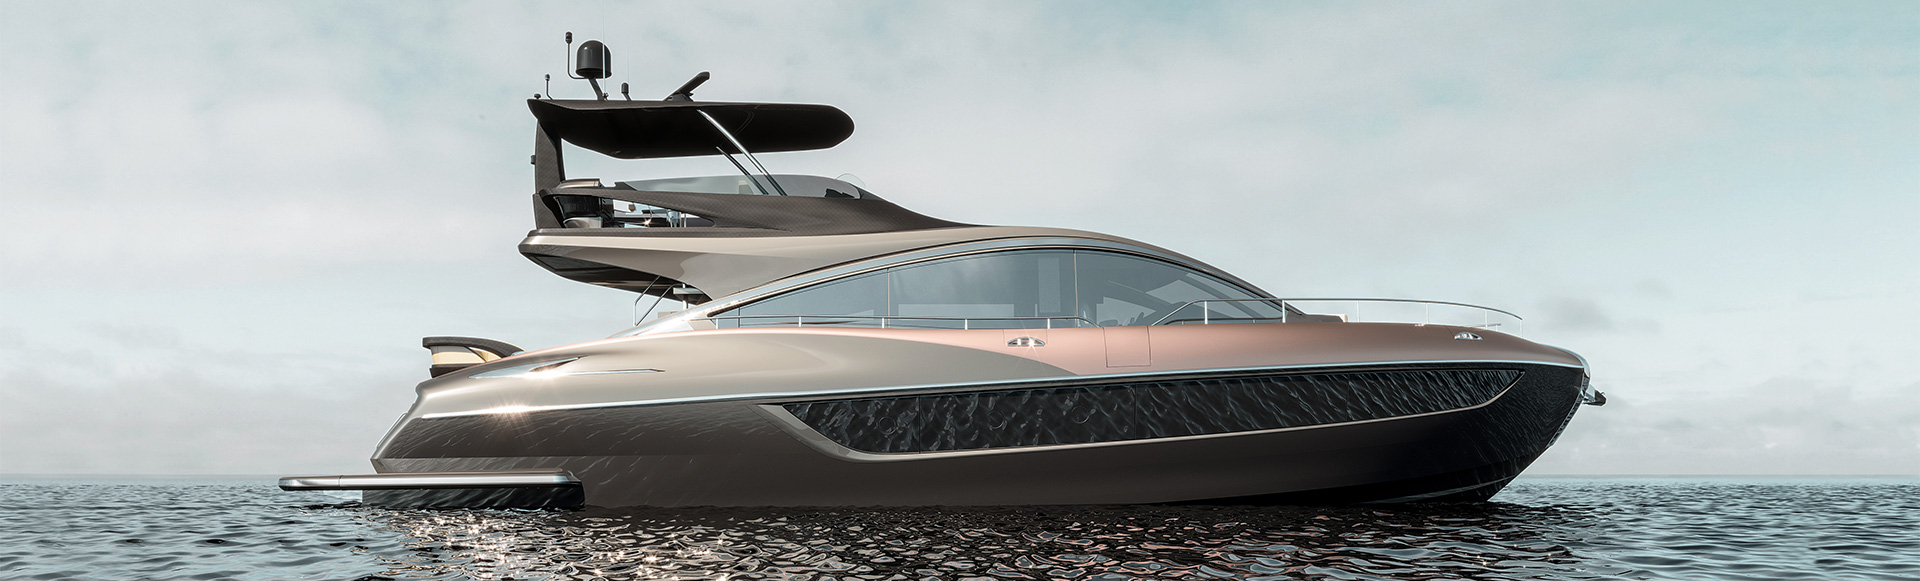 Lexus LY 650 Luxury Yacht Crafted in the Spirit of Amazing